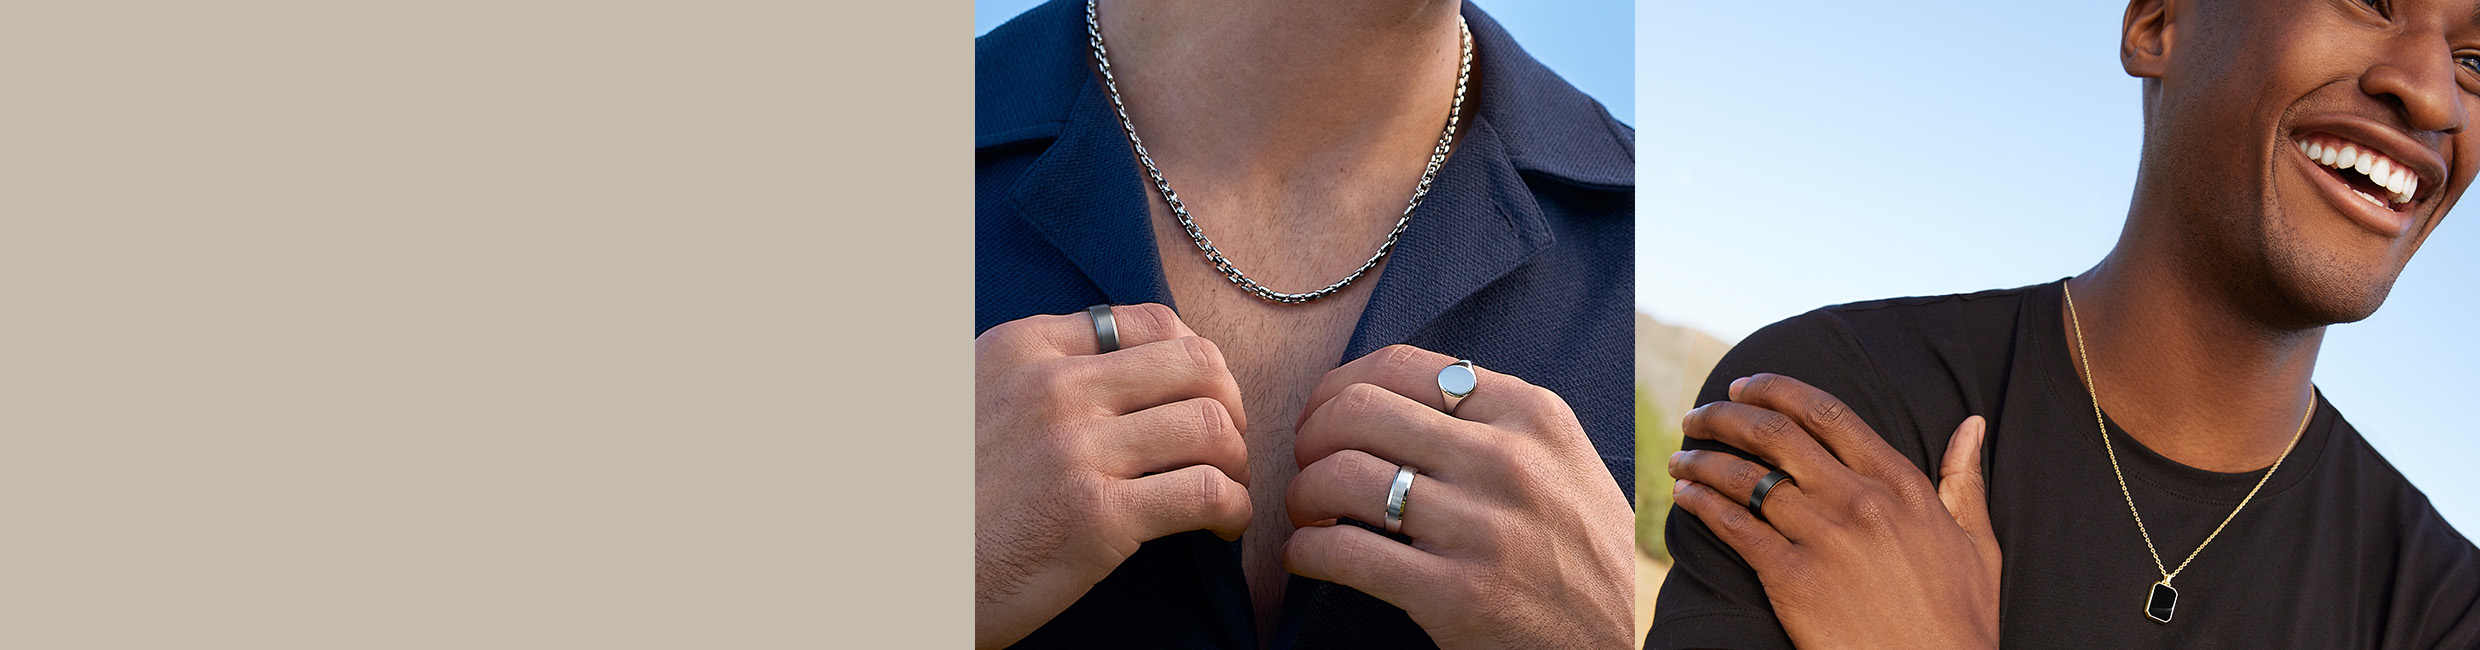 Two models wearing men's fine jewelry and wedding bands.